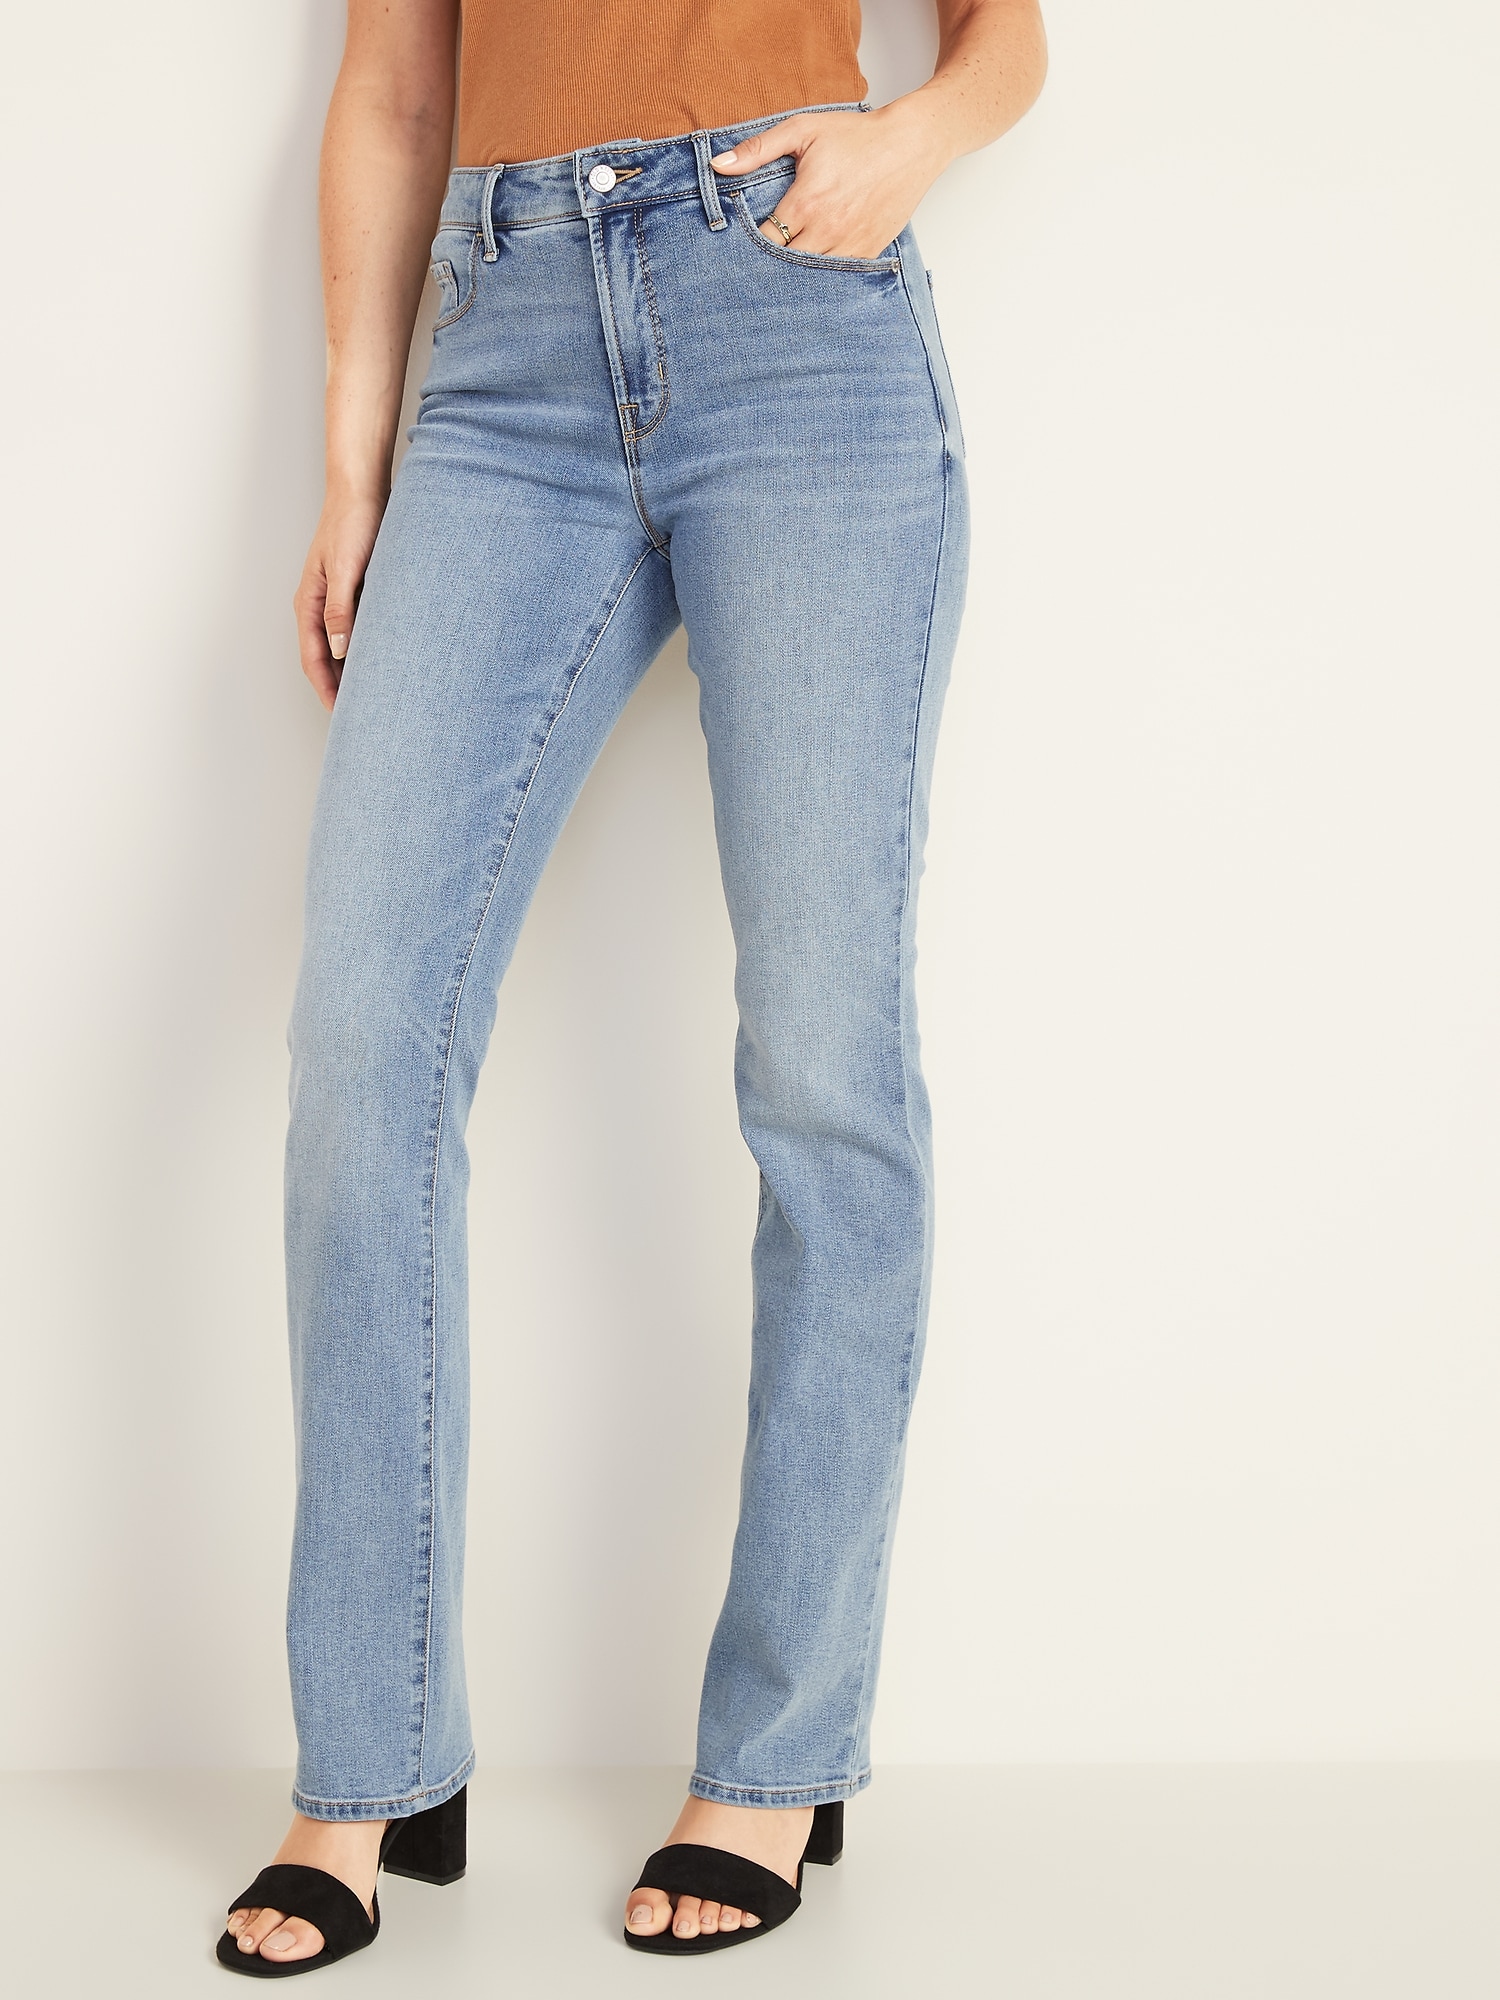 old navy women's curvy bootcut jeans